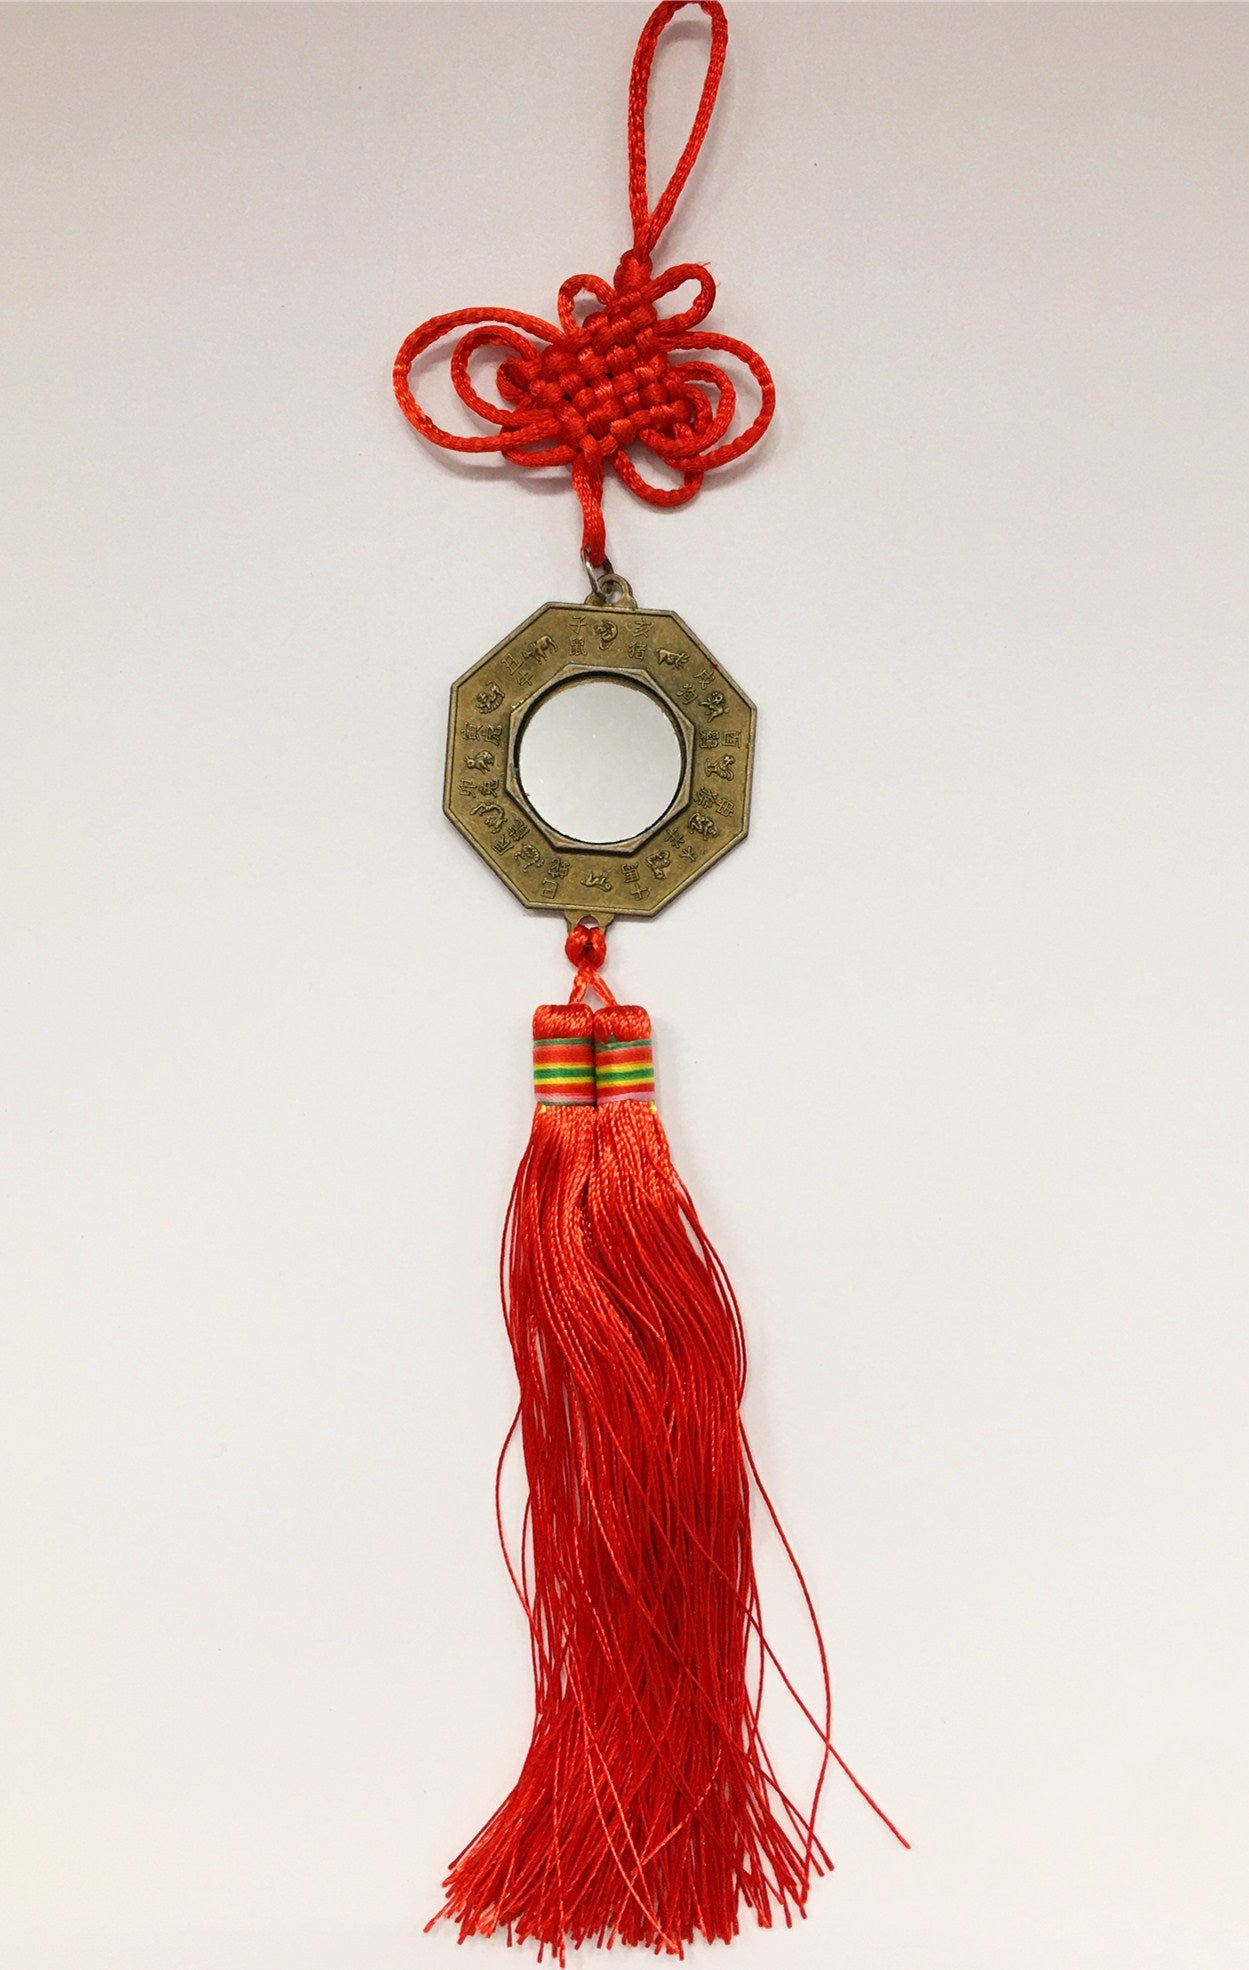 YinYang Feng Shui ornament with Chinese red thread knot